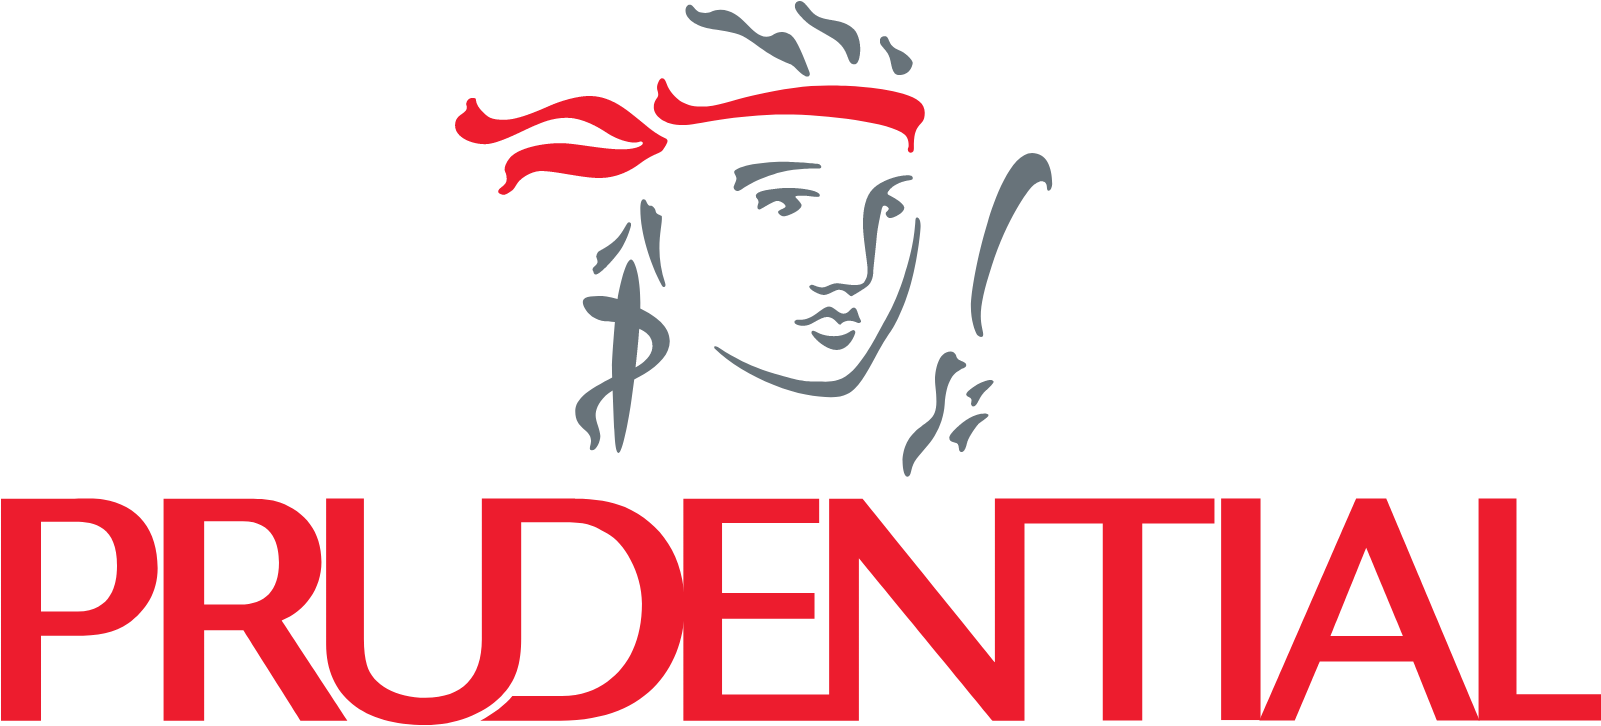 Prudential logo in transparent PNG and vectorized SVG formats